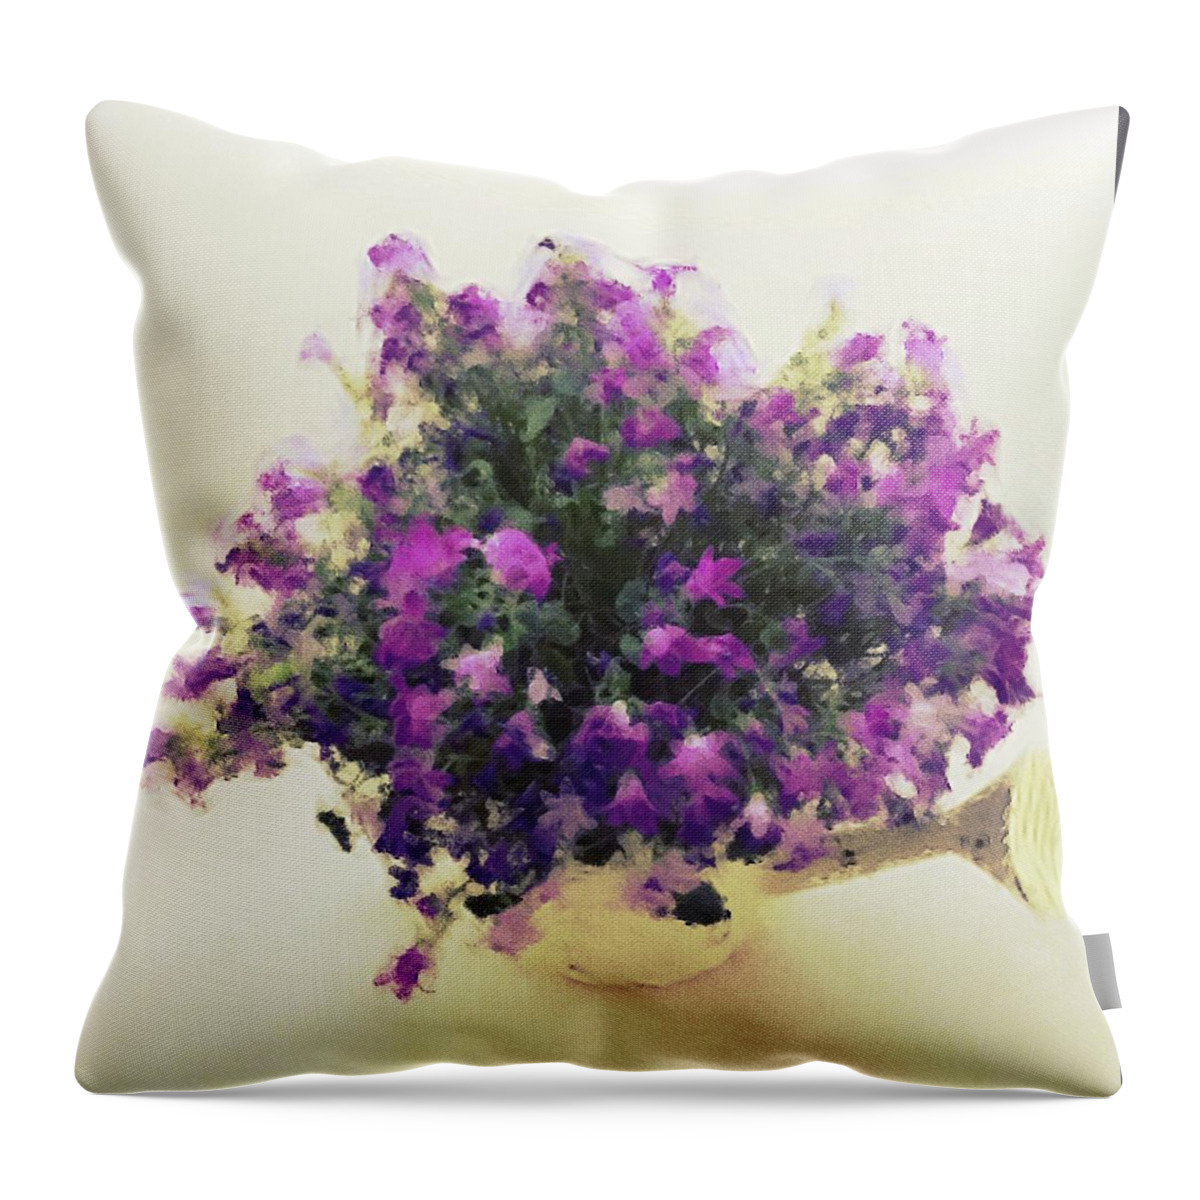 Purple Throw Pillow featuring the photograph Purple Flowers by Kate Hannon